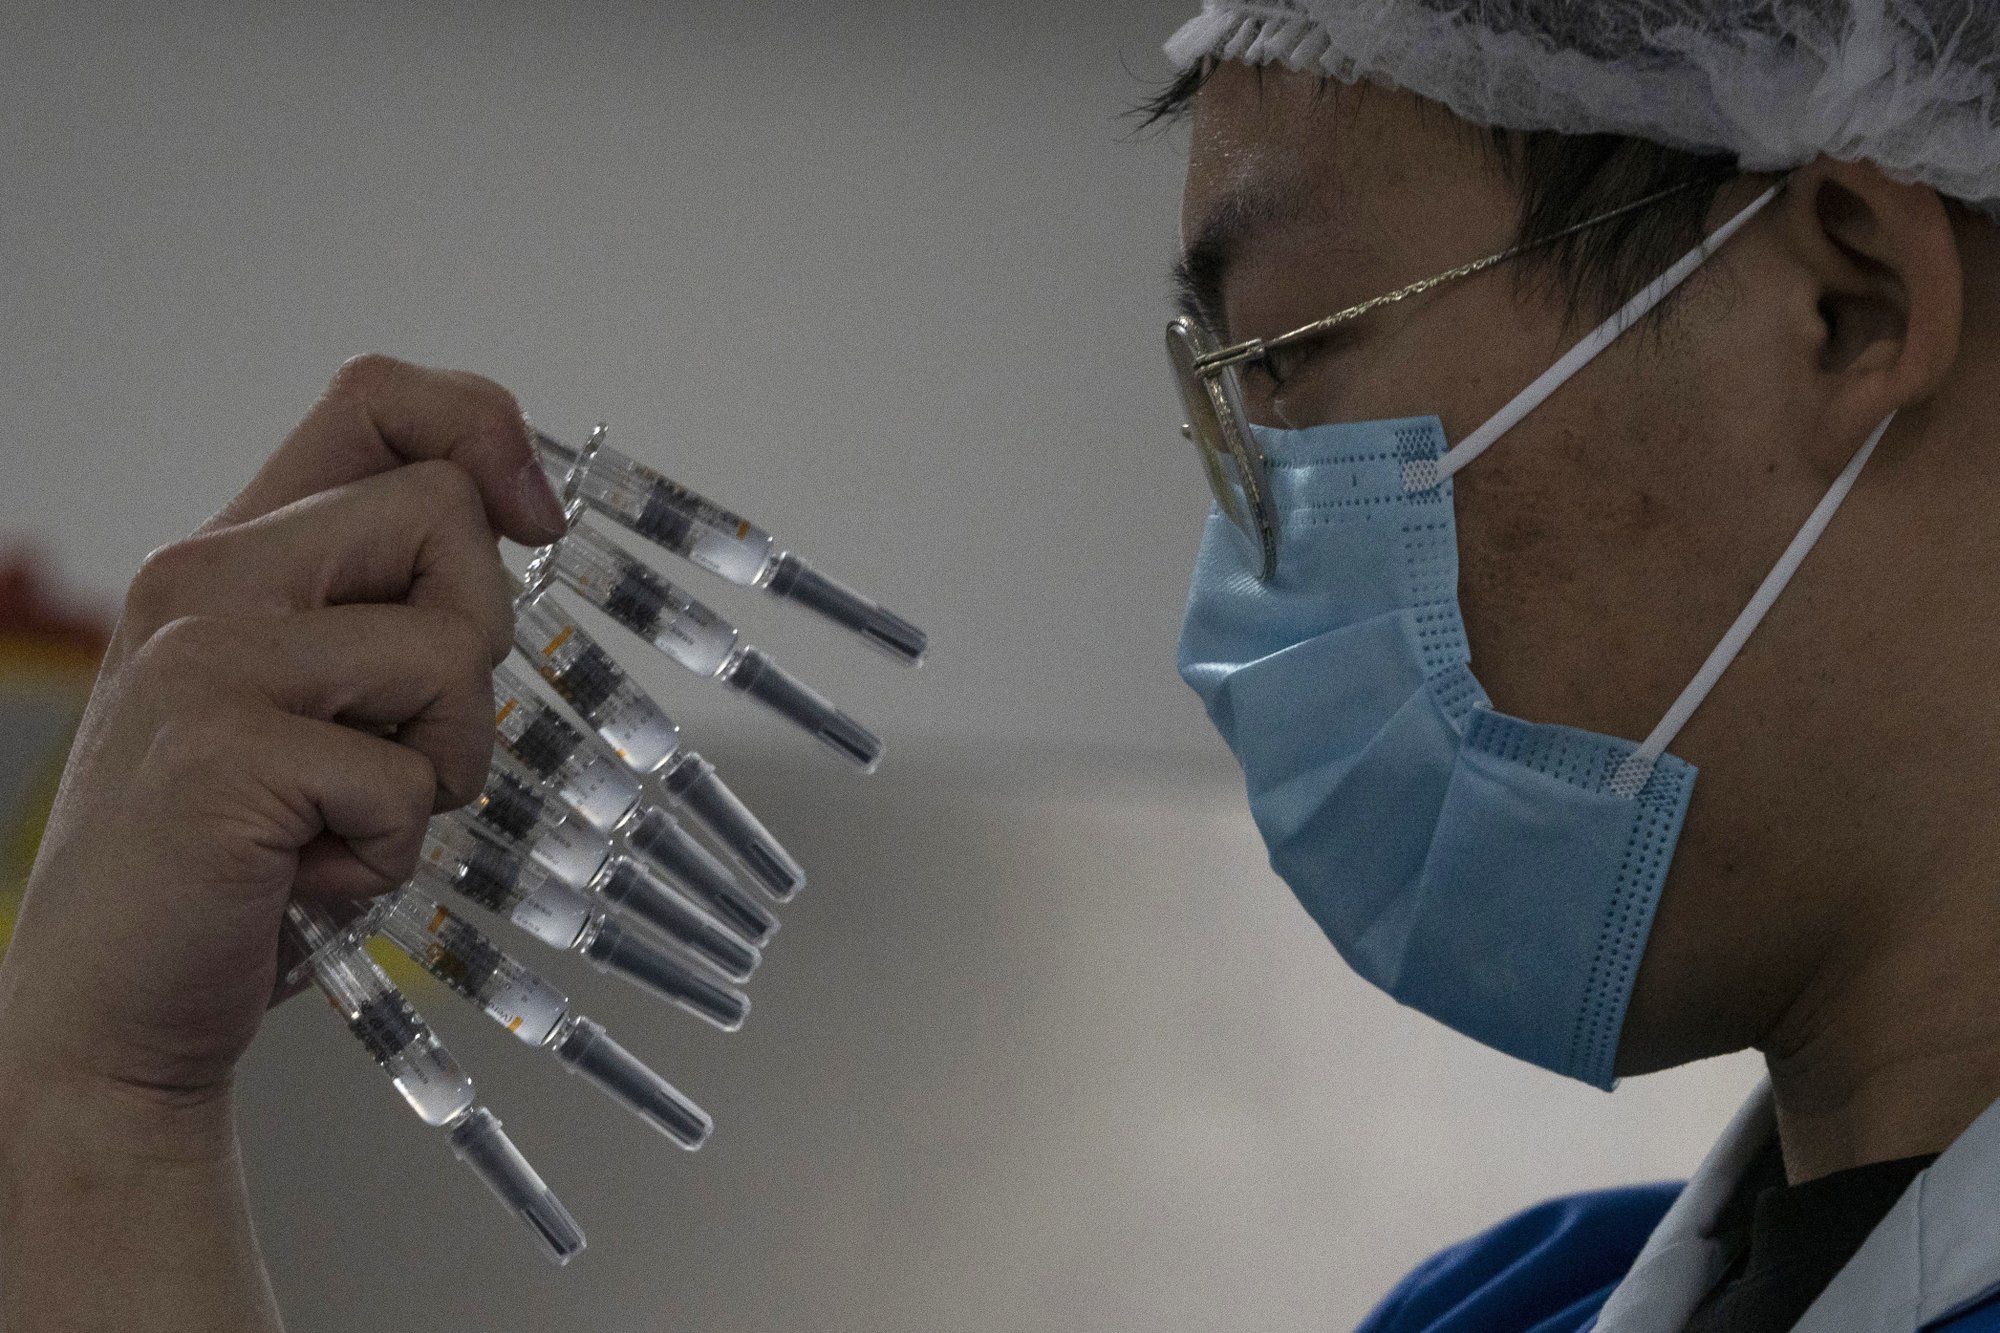 chinese-vaccines-sweep-much-of-the-world-despite-concerns